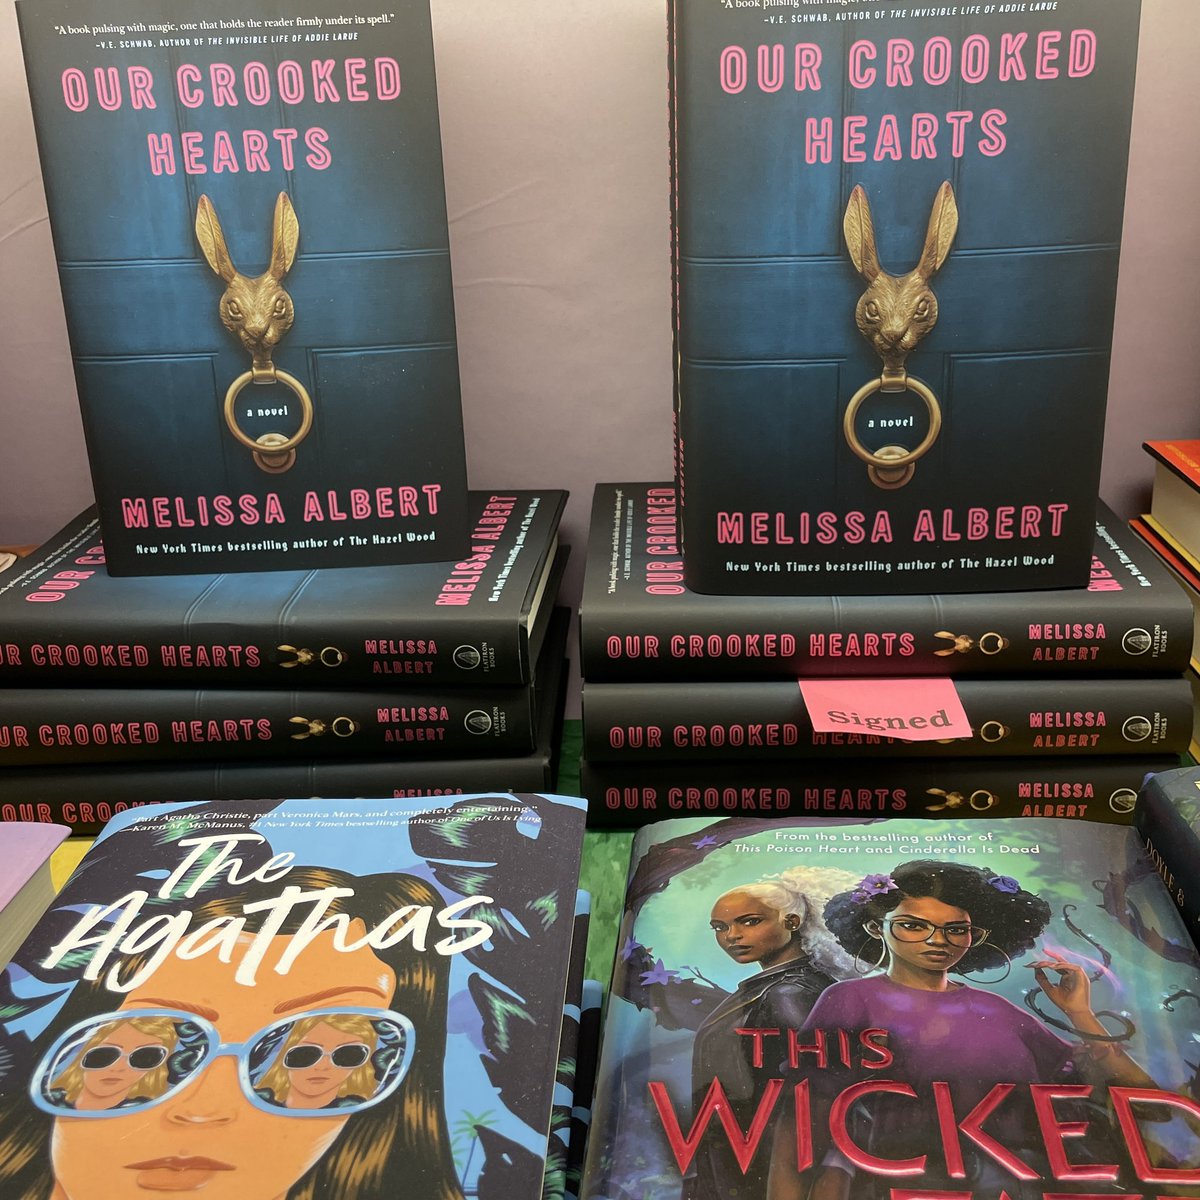 So good we got two stacks. Get your signed first edition now! #booksmakeusbetter #ourcrookedhearts #signedfirst #melissaalbert